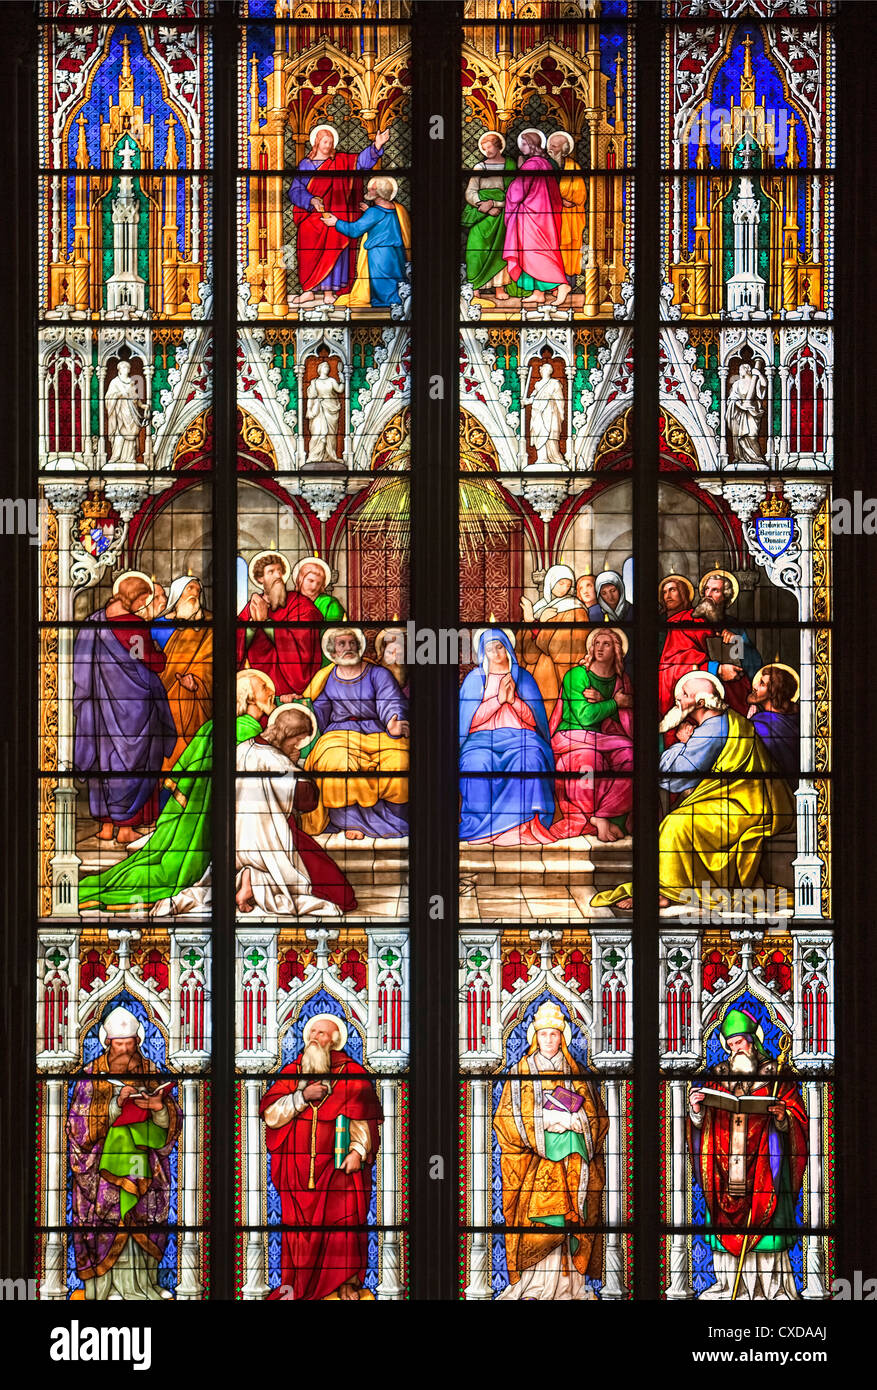 Bavarian window, Holy Spirit, Pentecost window with Mary, Peter and Paul, Ambrose, Gregory, Cologne Cathedral, Germany, Europe Stock Photo